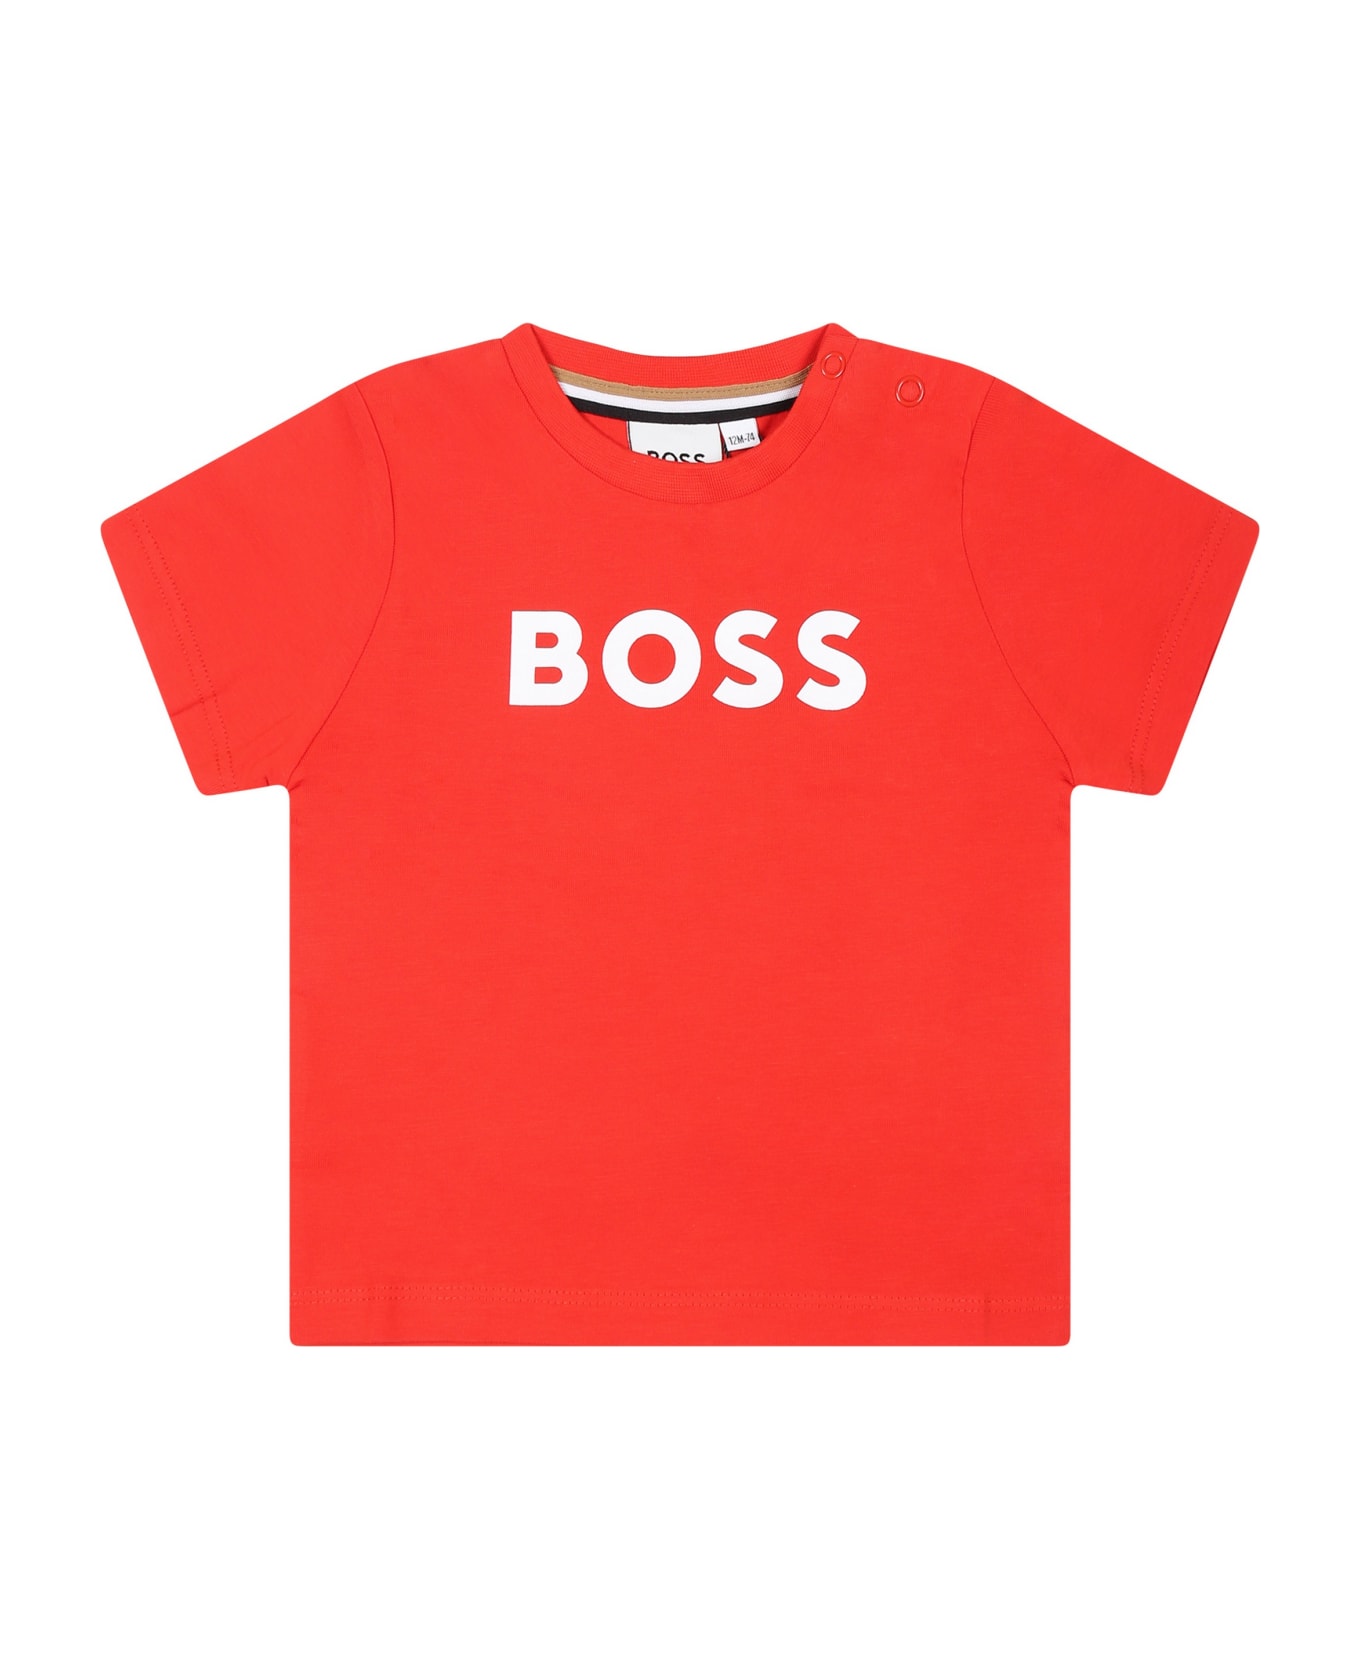 Hugo Boss Red T-shirt For Baby Boy With Logo - Red